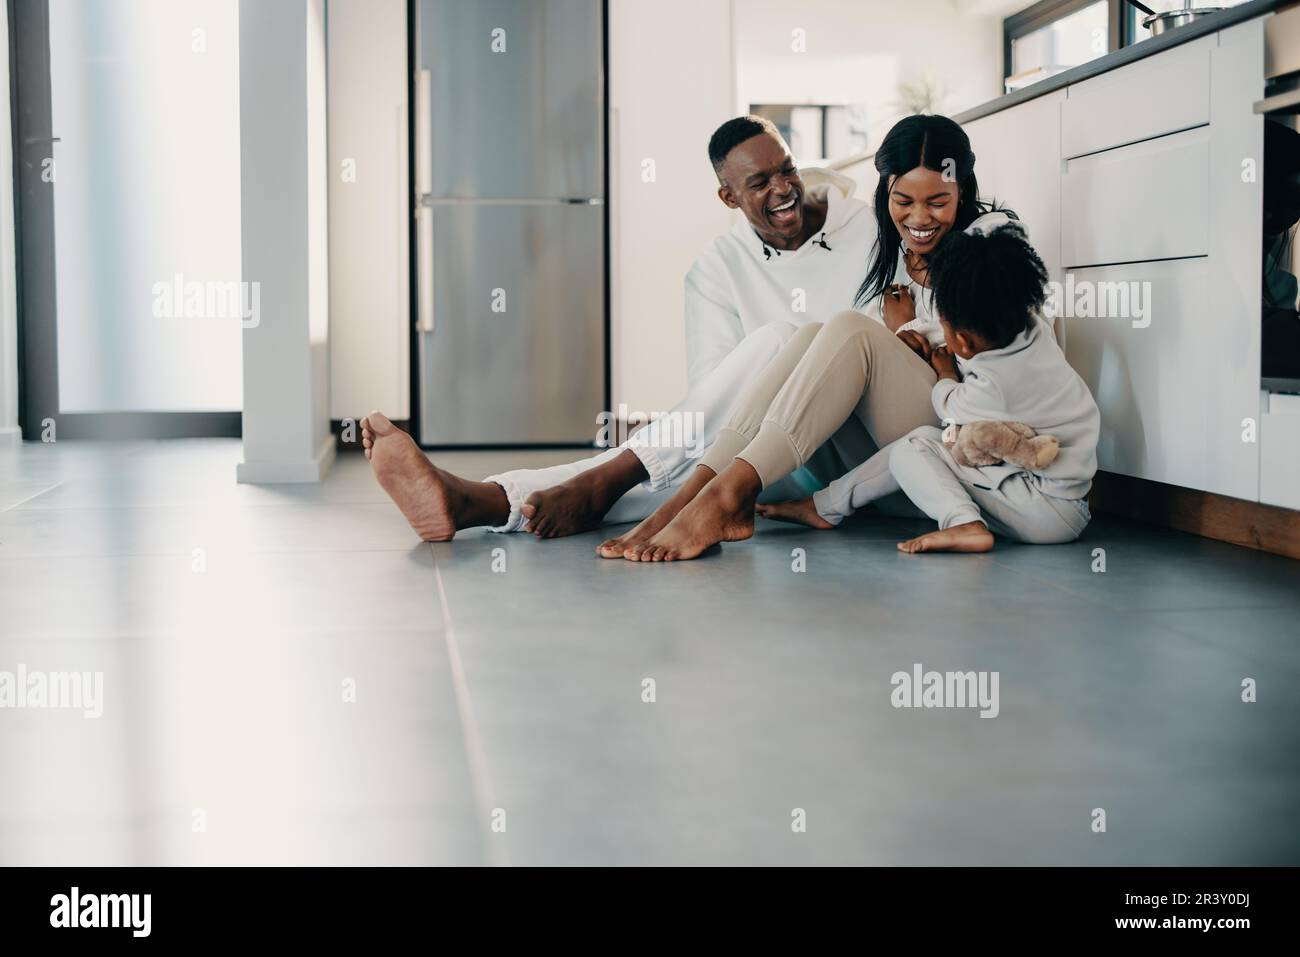 Family of three playing together and enjoying a fun moment. Parents having fun with their daughter while sitting on the floor in the kitchen. Black co Stock Photo